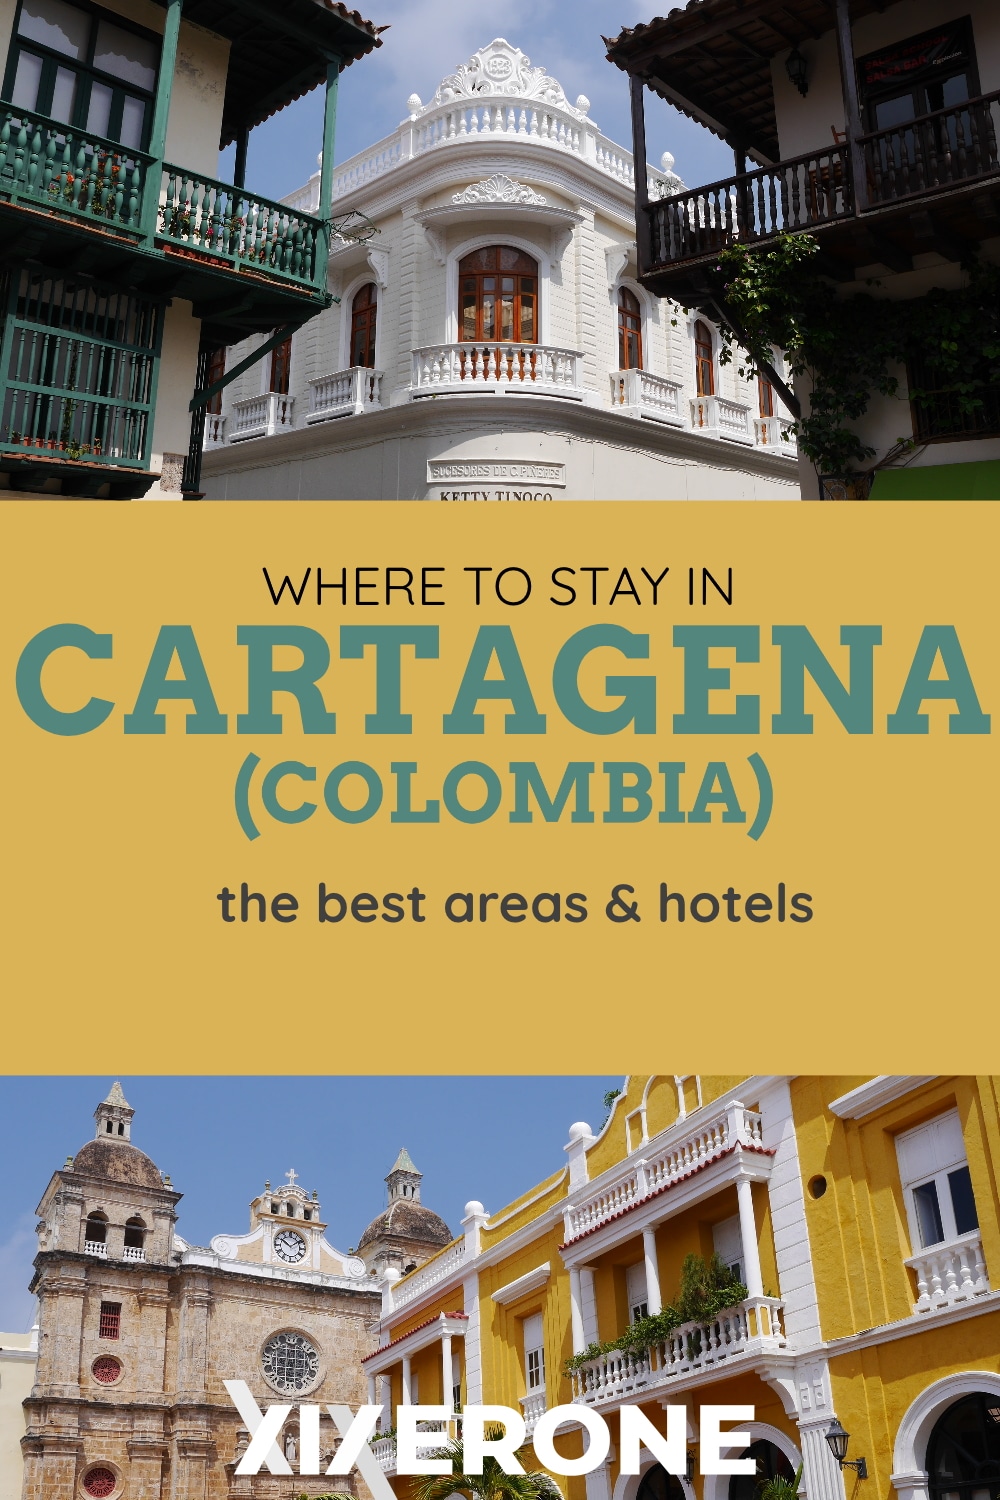 Where to Stay in Cartagena, Colombia - Best Areas & Hotels